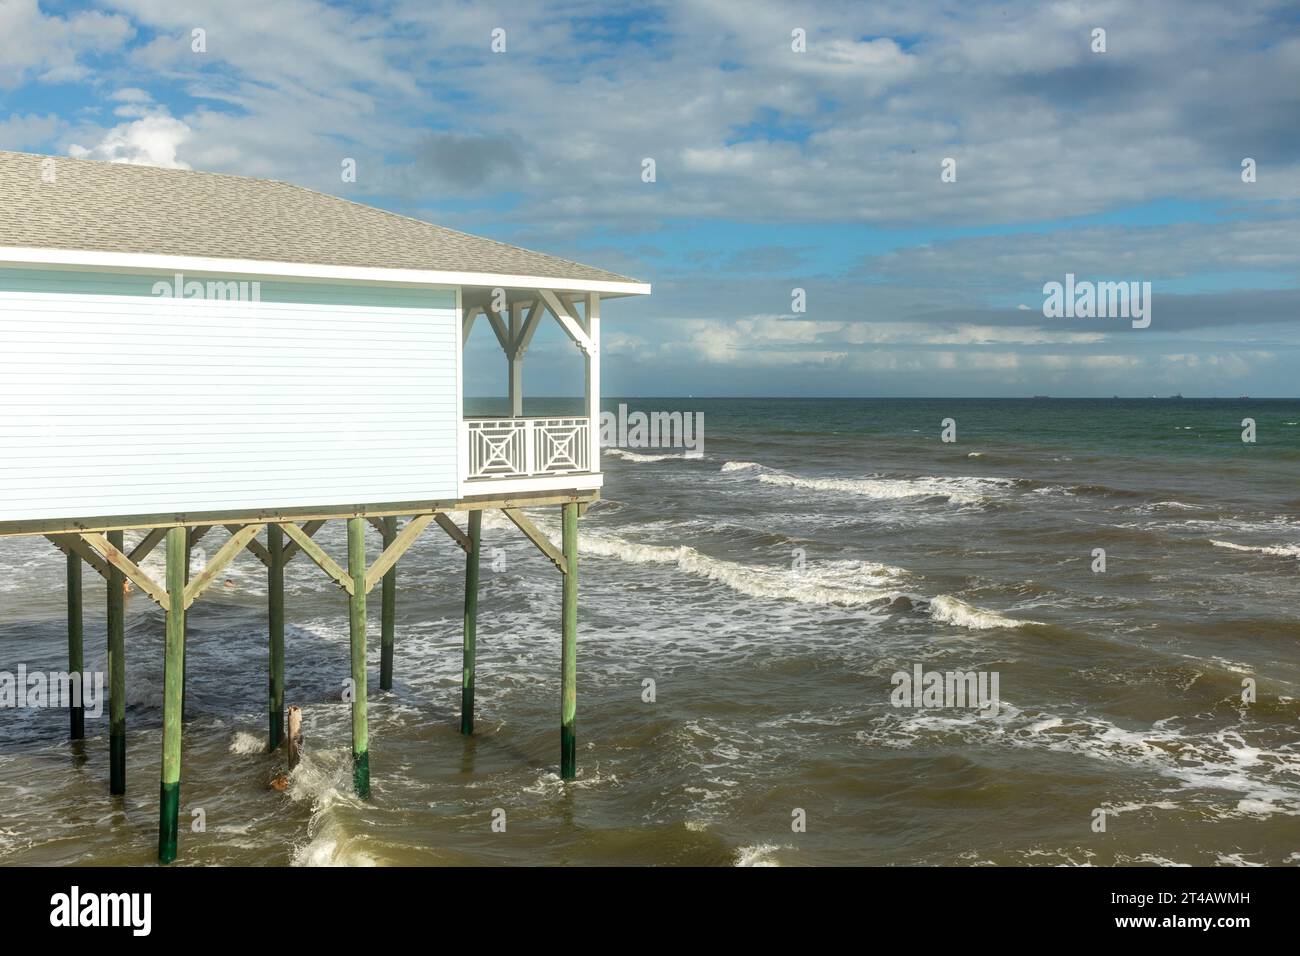 typical house on stilts to prevent damage by flooding in stormy weather  as nearly every wooden house at the coast in Texas is constructed this way, G Stock Photo